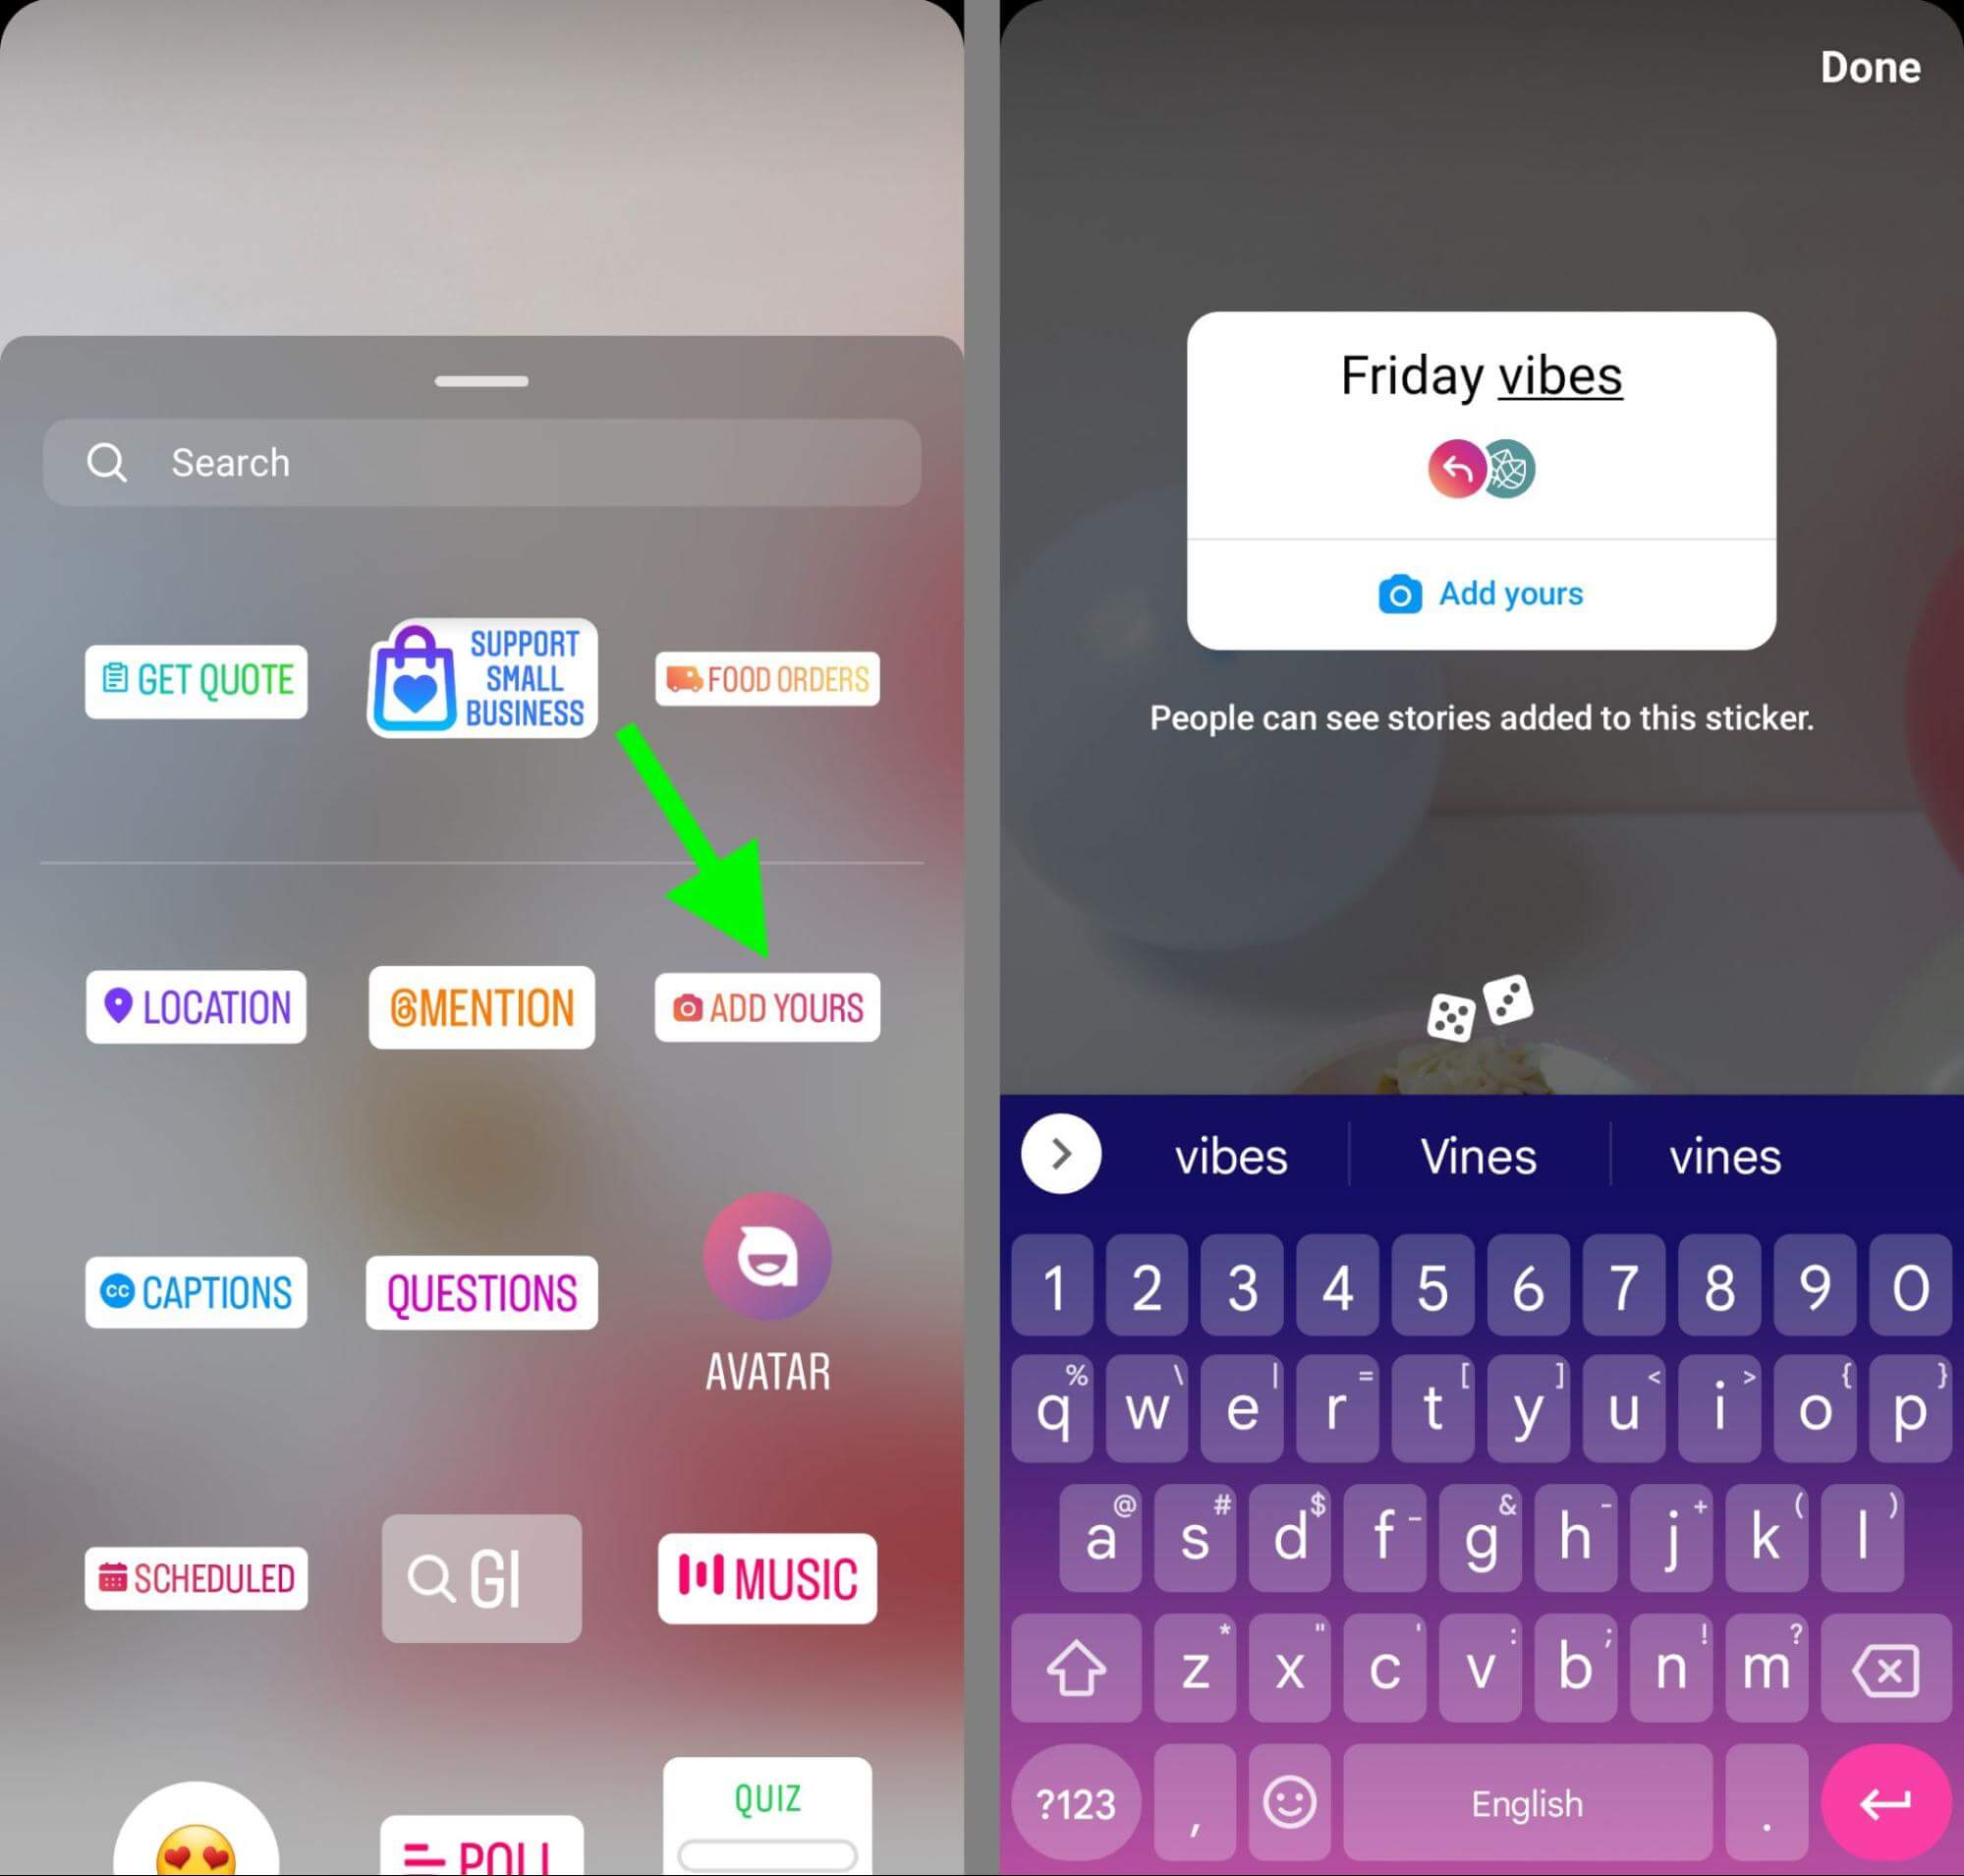 how-to-start-your-own-trend-with-add-yours-stickers-on-instagram-tool-for-publishing-interactive-content-create-prompt-tap-dice-to-see-random-prompt-ideas-example-13